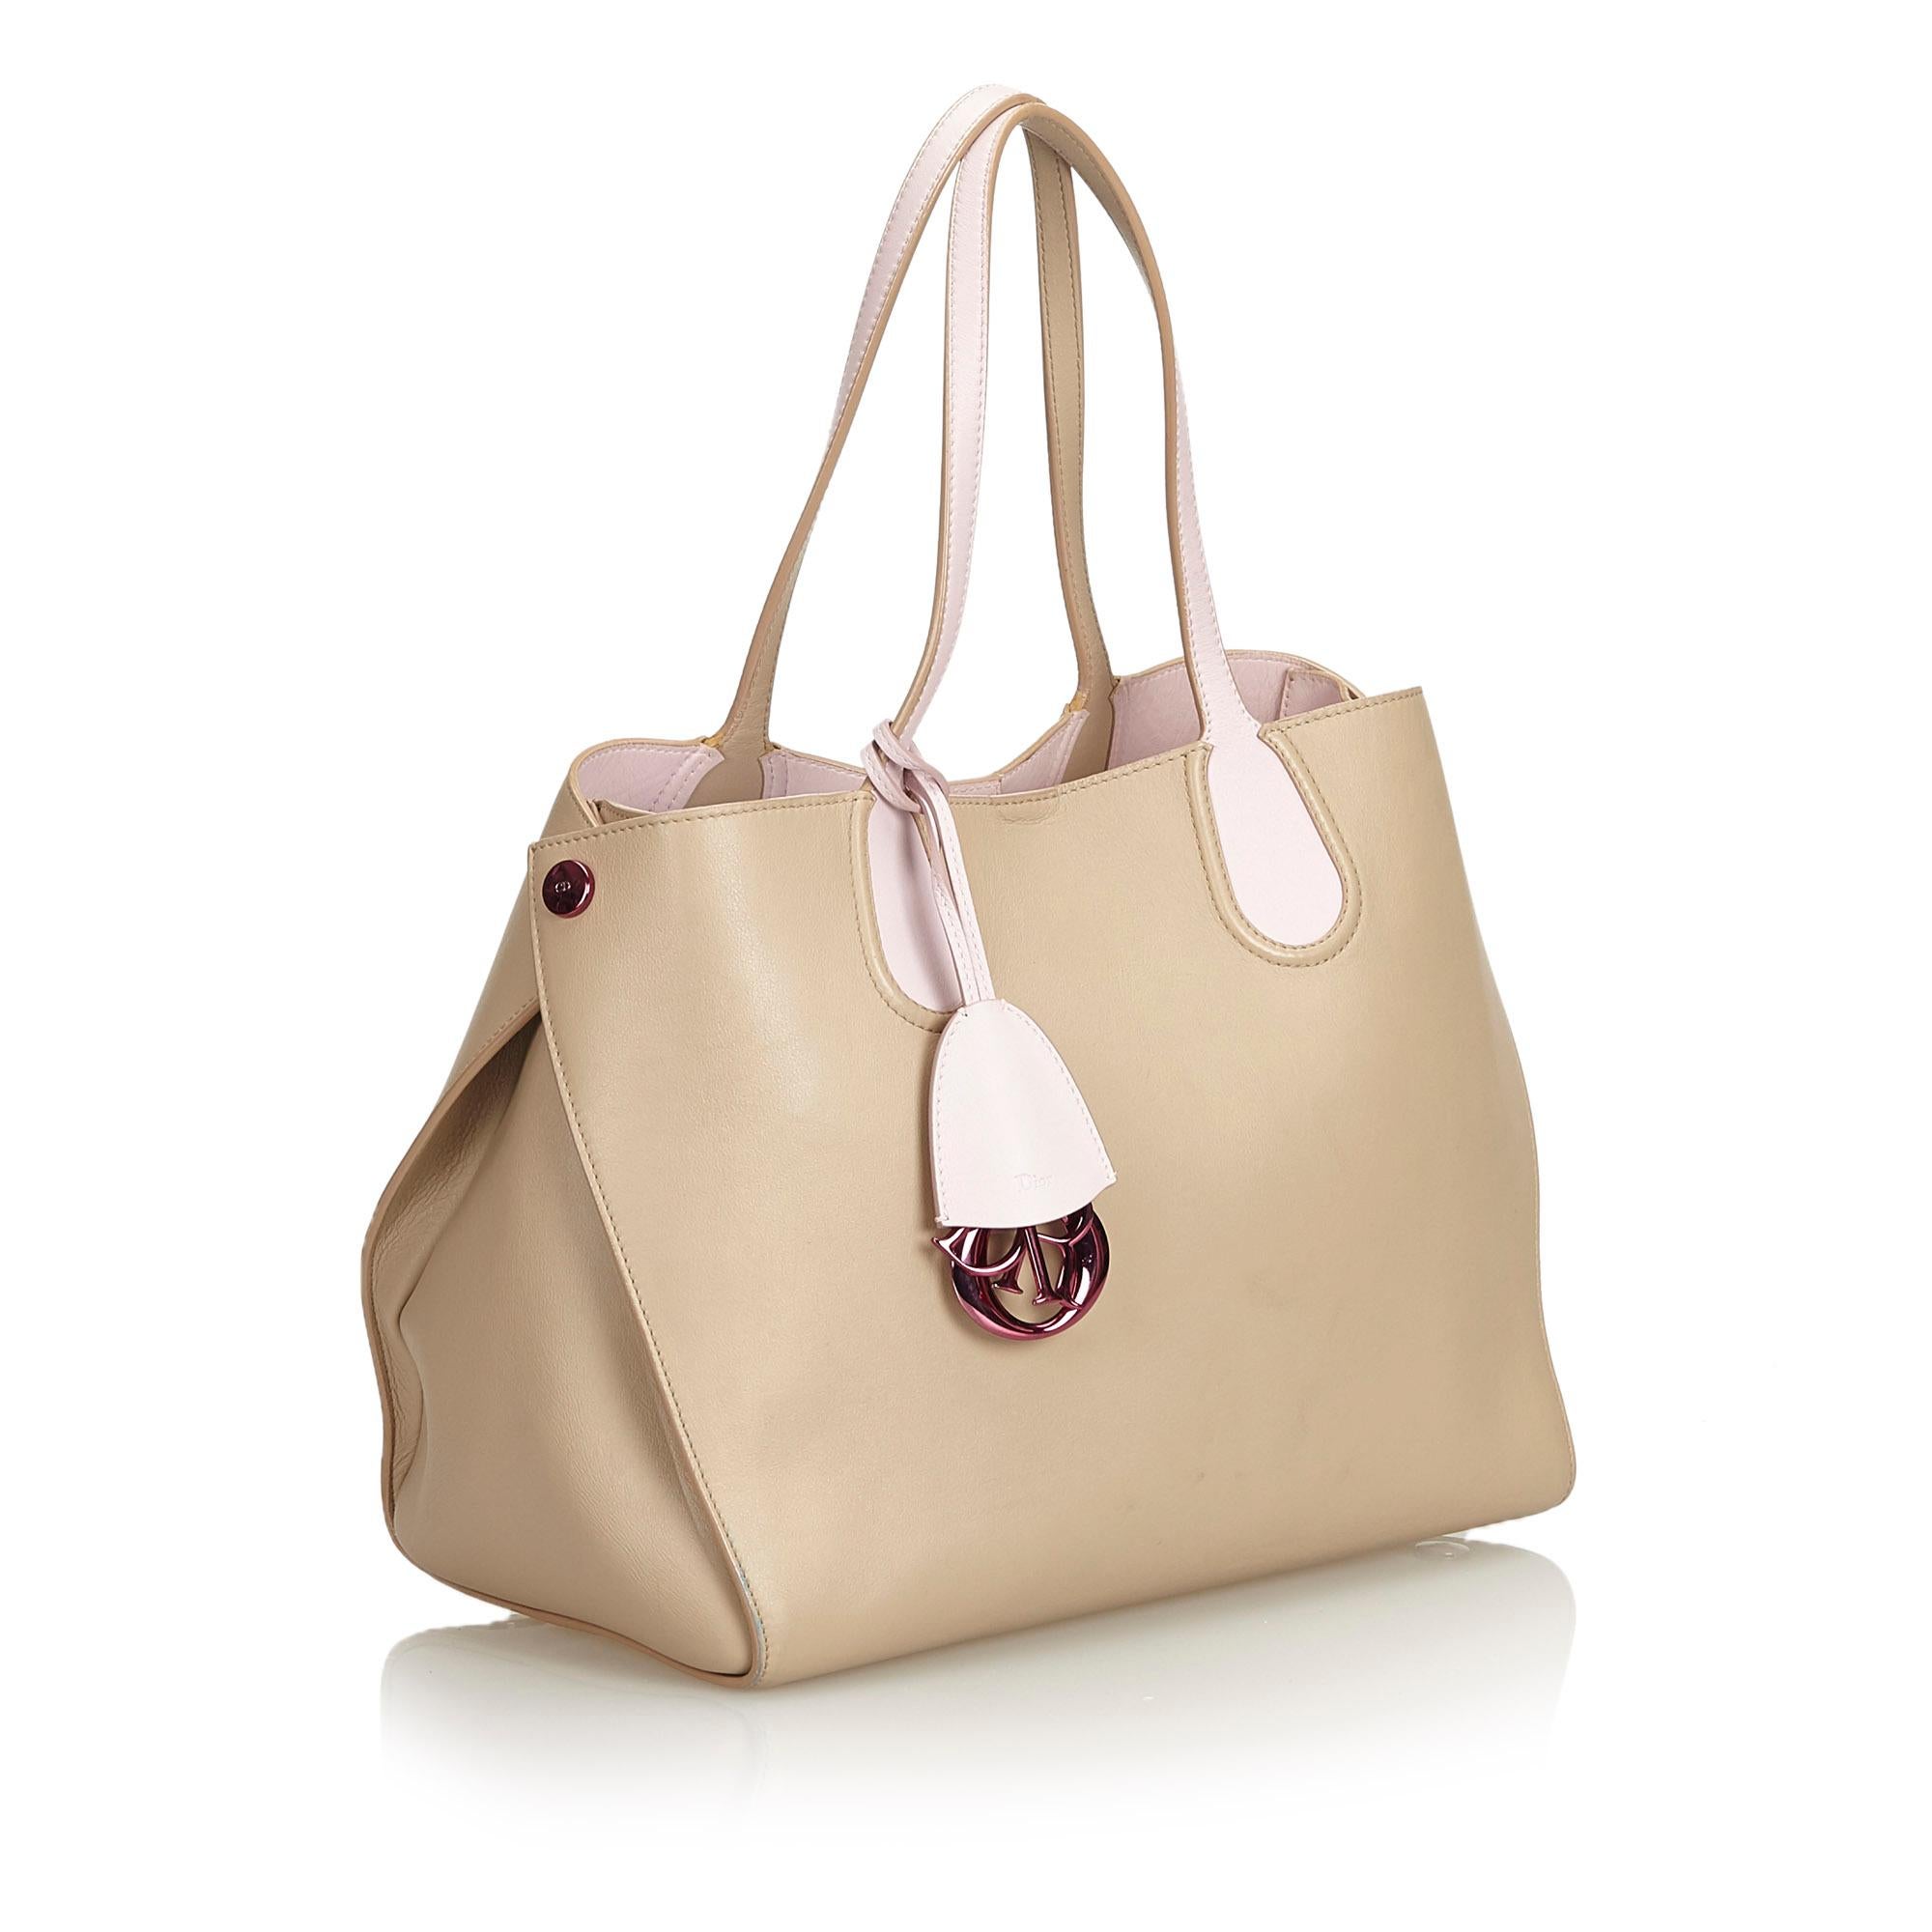 The Addict tote bag features a leather body, exterior side button details, flat leather handles, and an open top with a magnetic closure. It carries as B+ condition rating.

Inclusions: 
This item does not come with inclusions.

Dimensions:
Length: